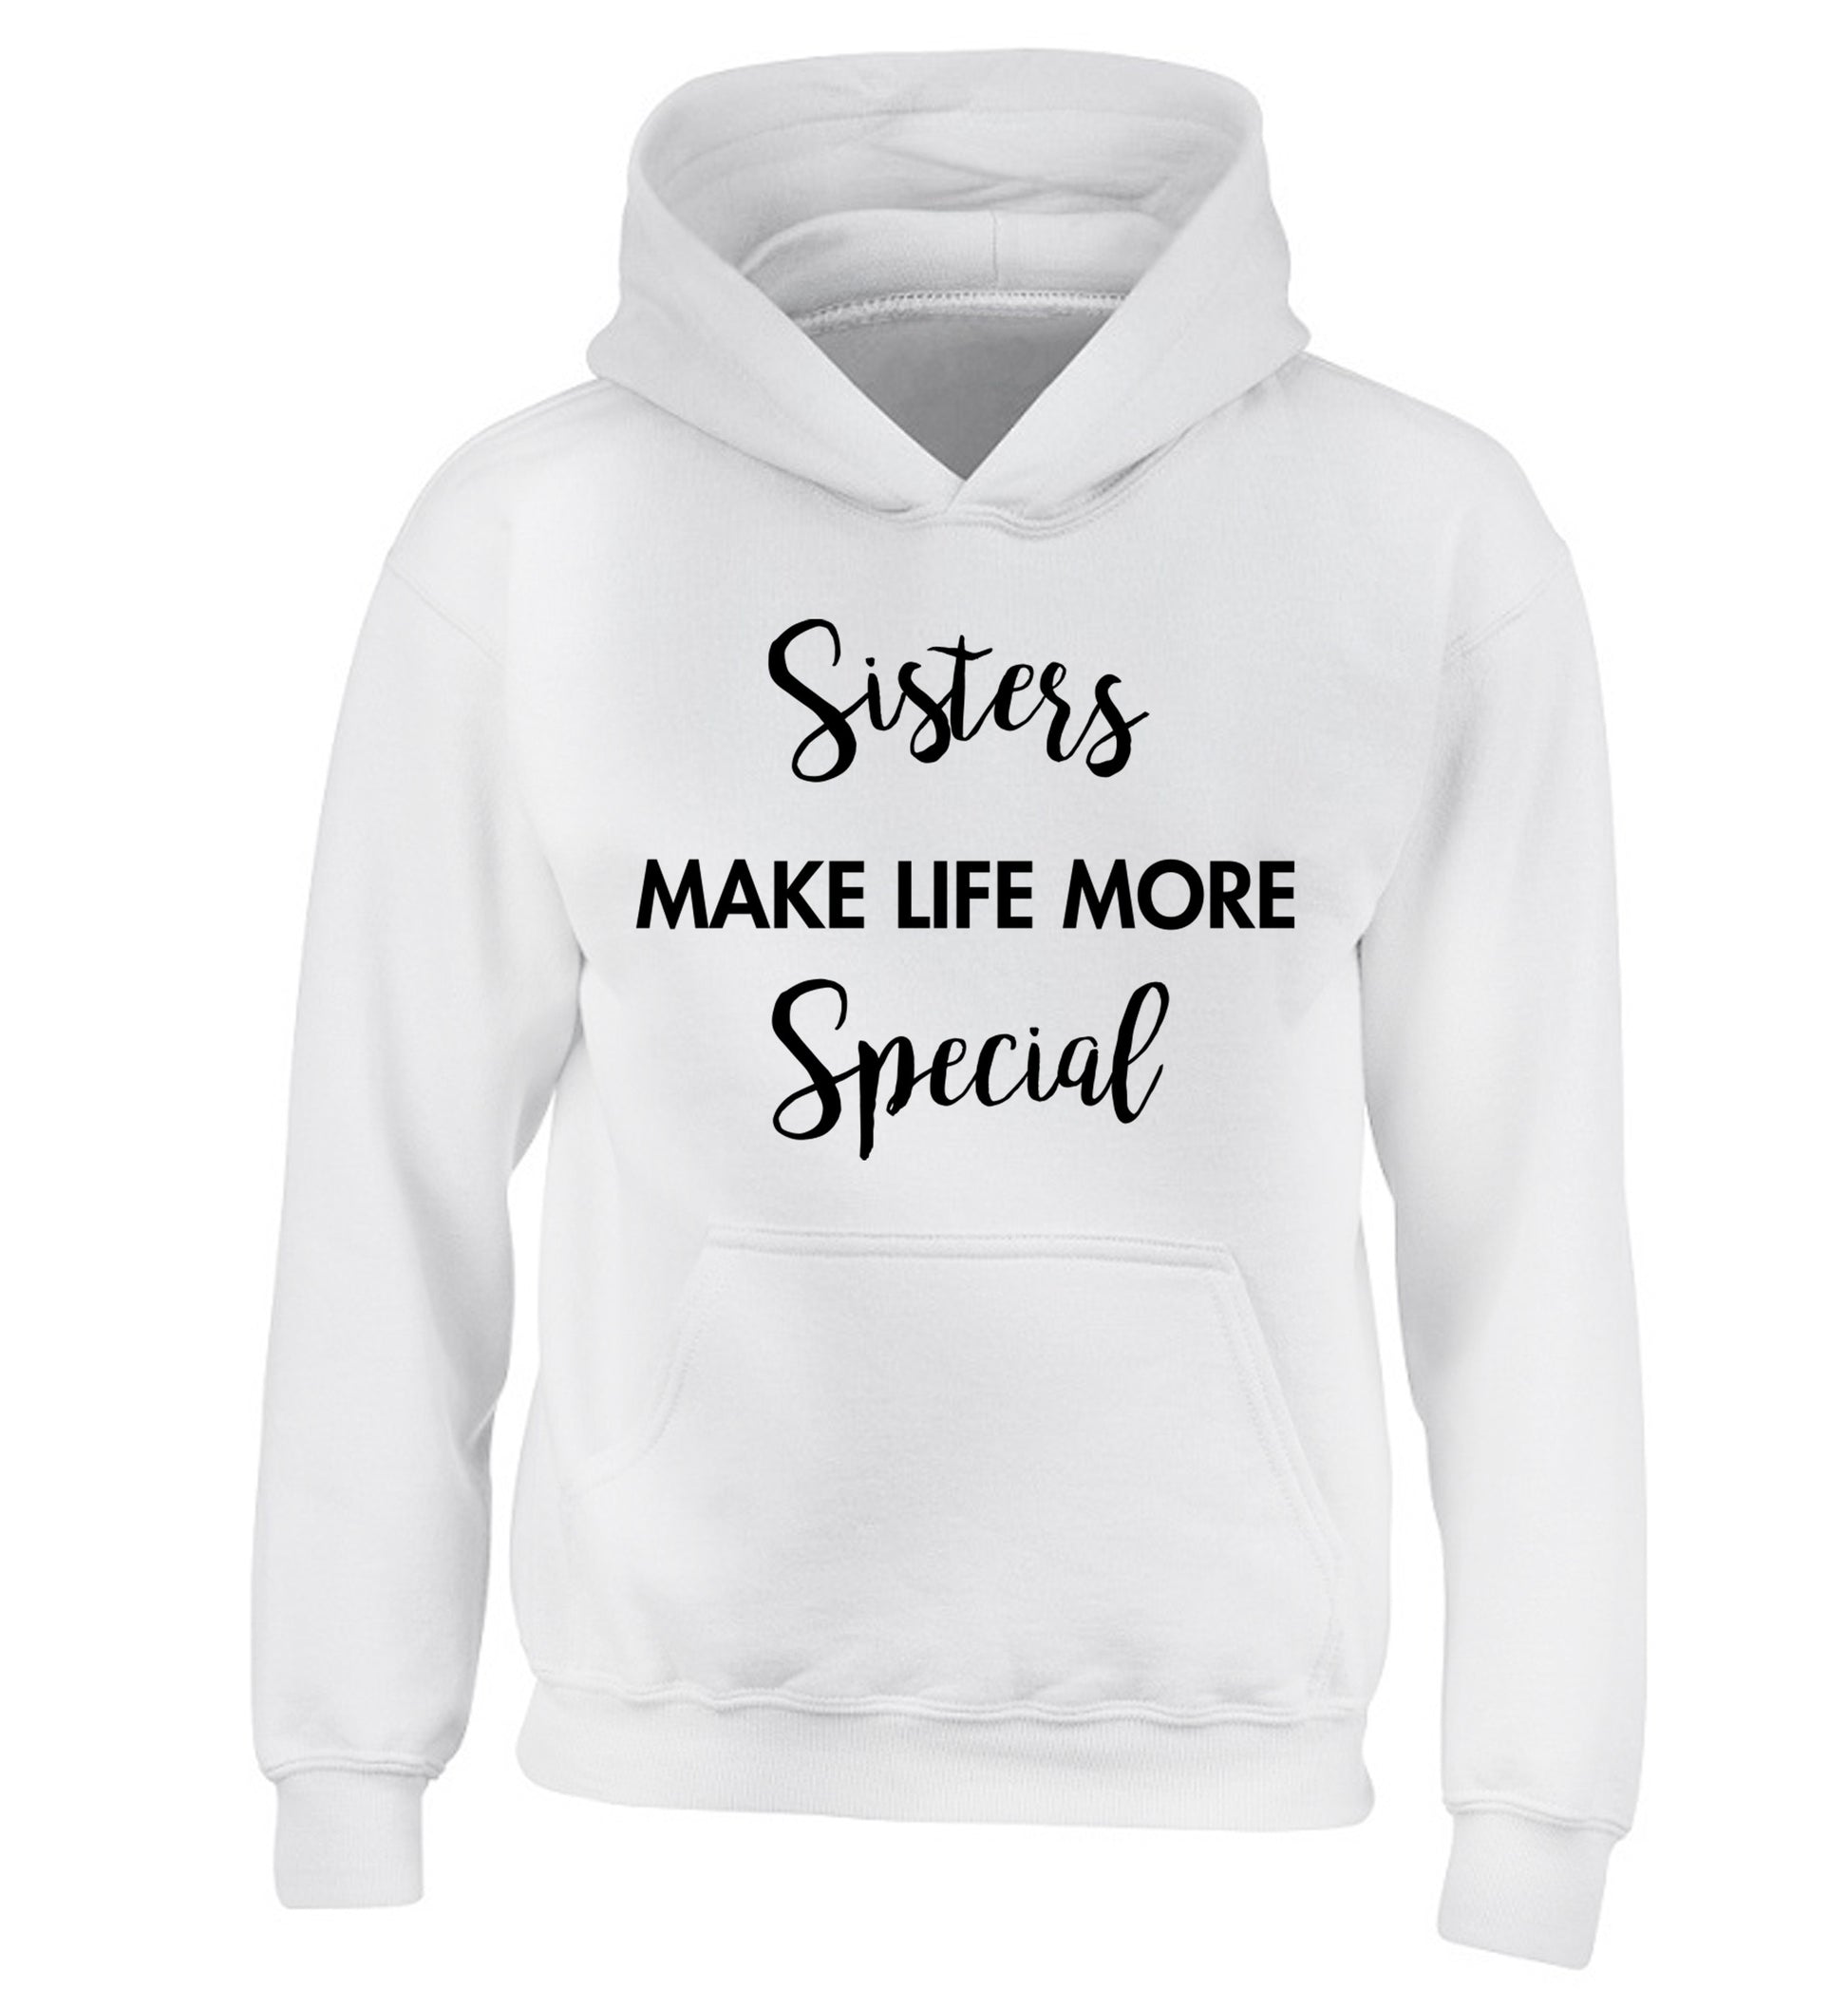 Sisters make life more special children's white hoodie 12-14 Years